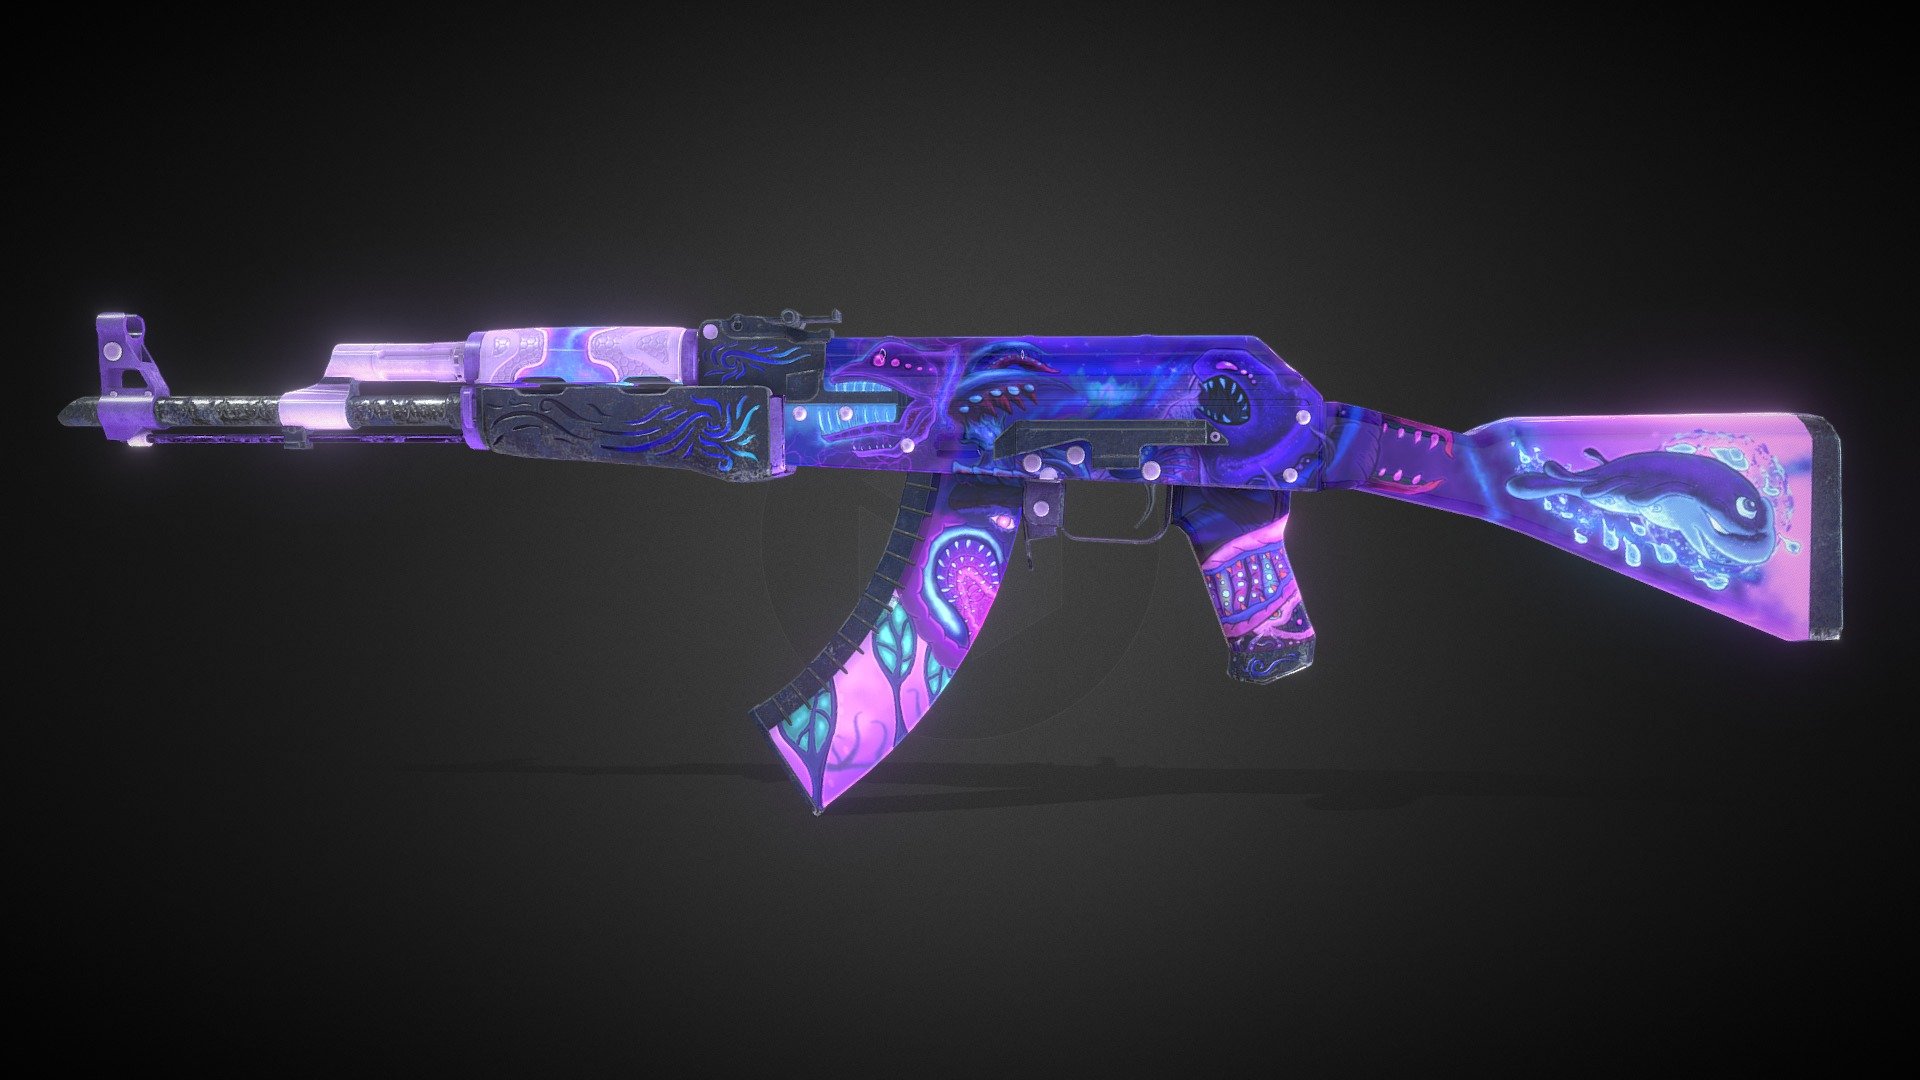 I am very honored to be able to make a skin for my favorite gun AK 47. When I am
 dreaming about the theme, I intend to incorporate the deep sea and starry sky 
elements, and bring in the nightmare to increase the beauty of the strange atmosphere.
 I hope you like it and thank you for your support.

https://steamcommunity.com/sharedfiles/filedetails/?id=2588993820

connection : howard112219@gmail.com - ak-47-Dreamland - 3D model by DORAGM 3d model